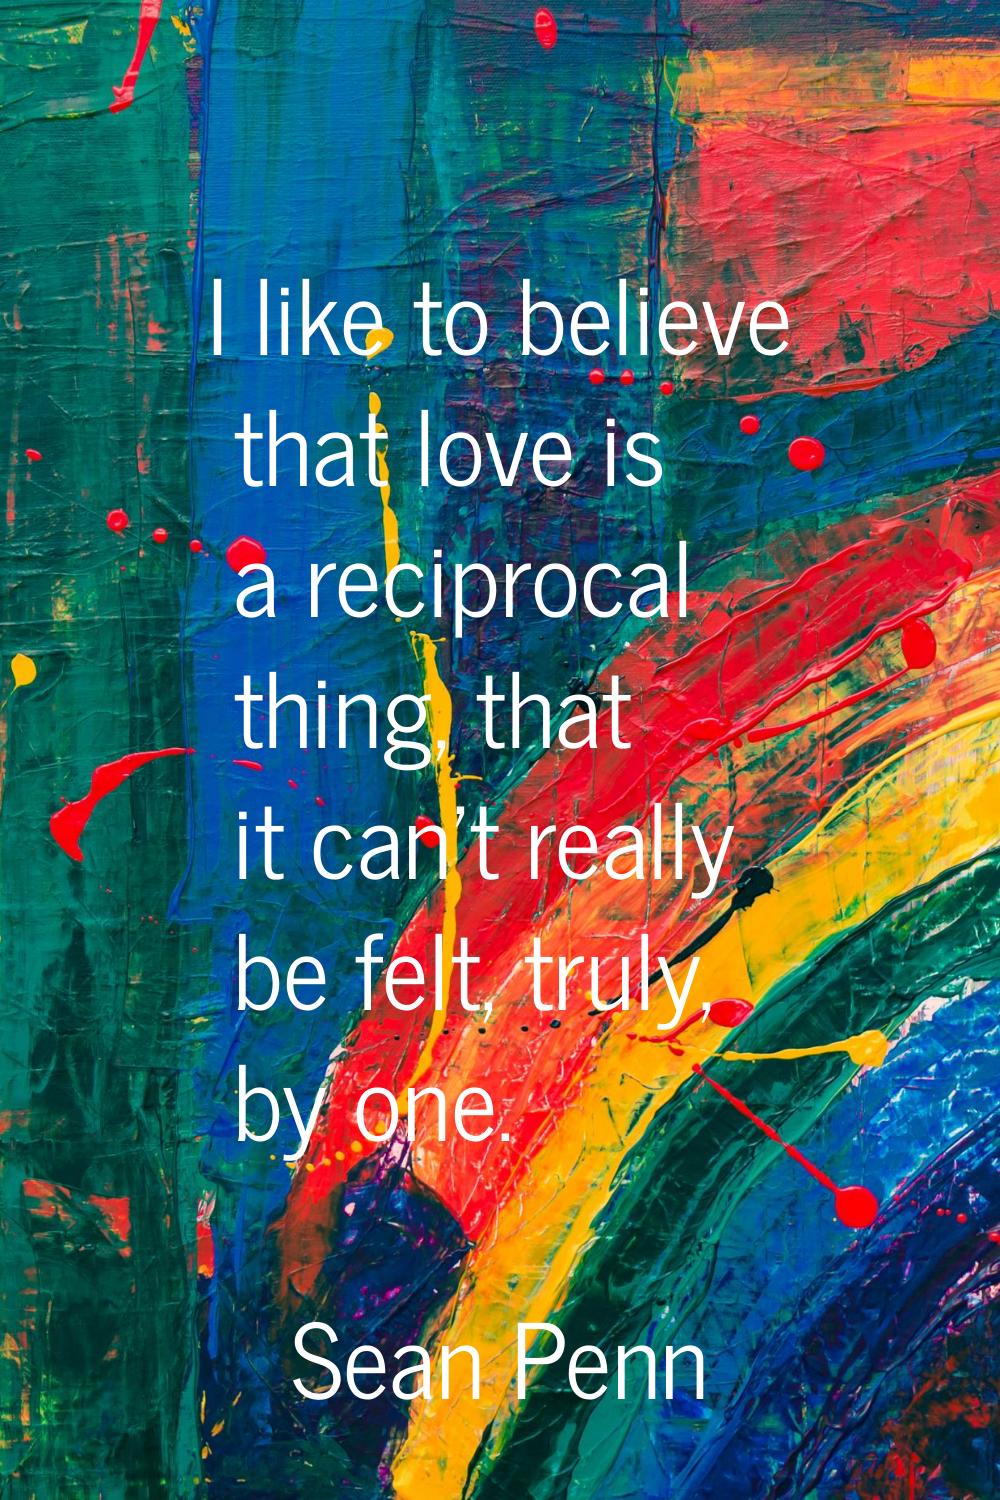 I like to believe that love is a reciprocal thing, that it can't really be felt, truly, by one.